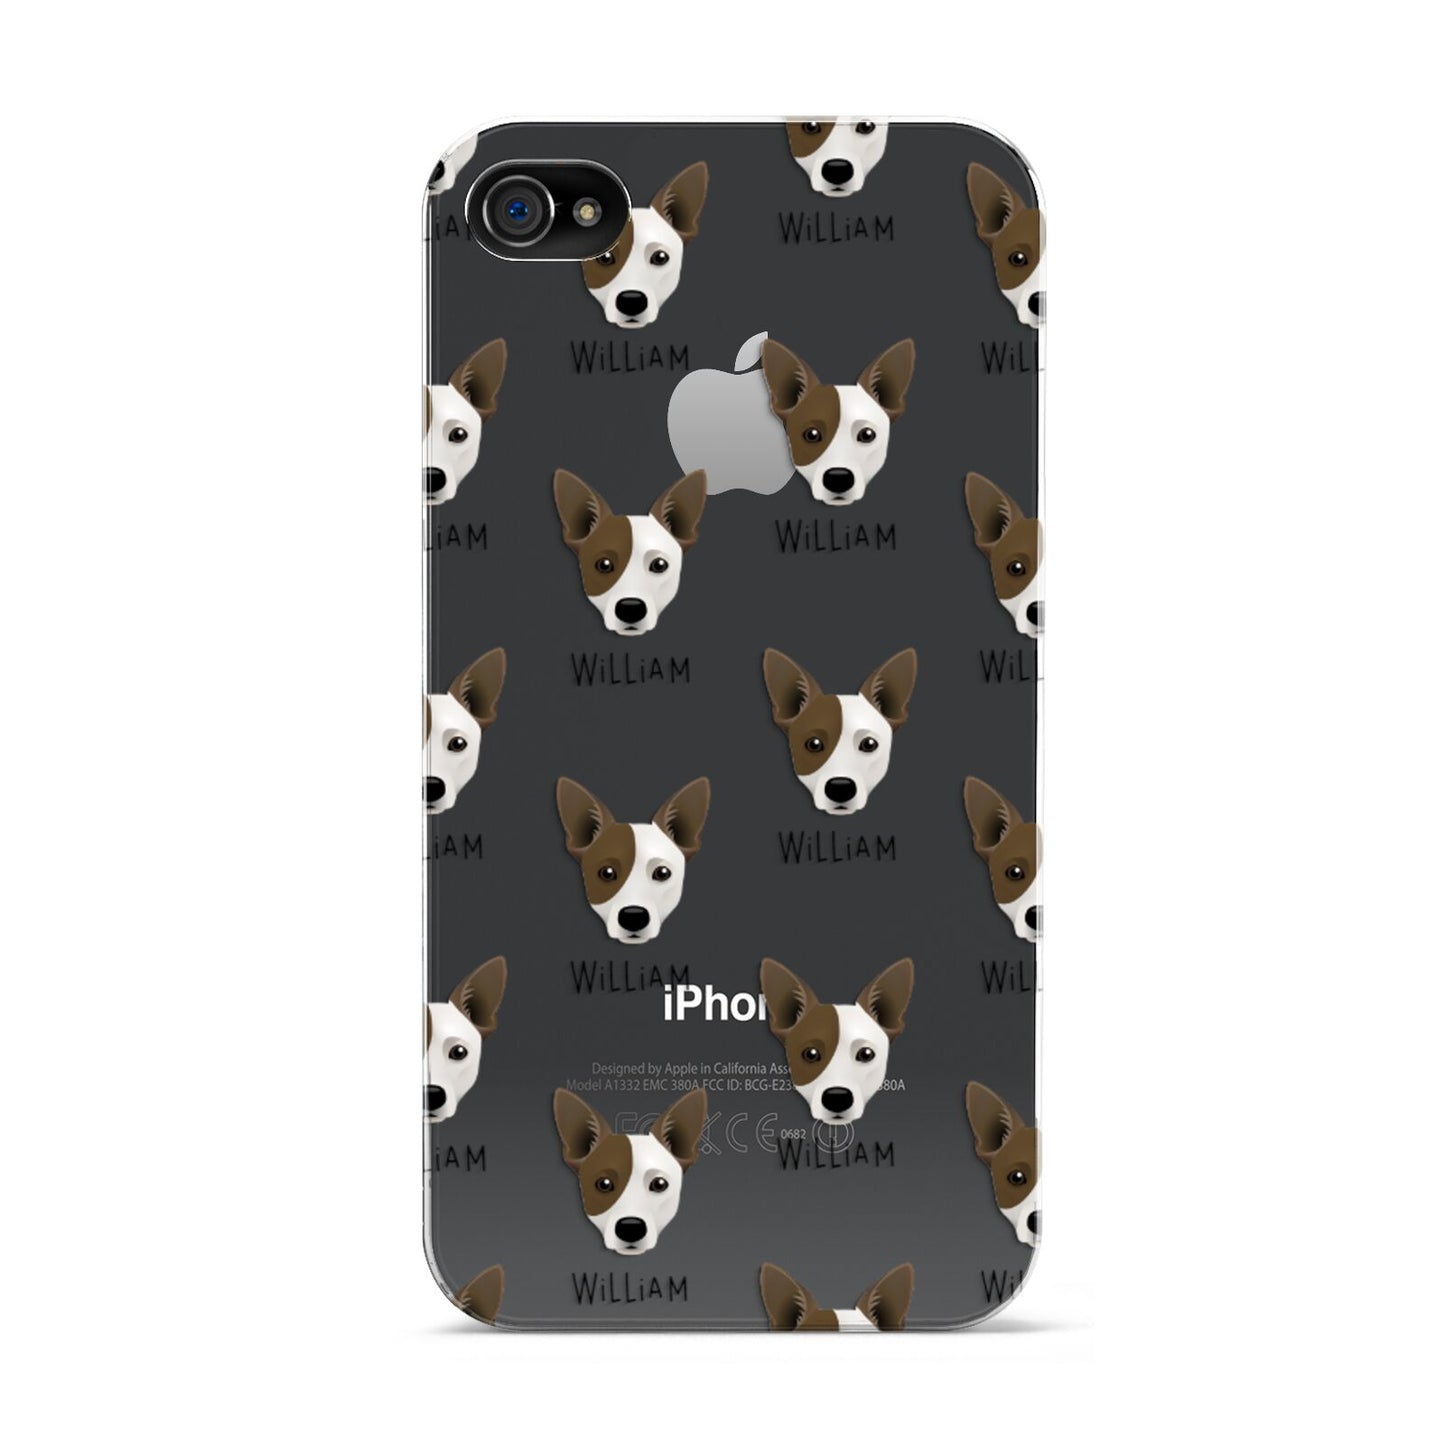 Cojack Icon with Name Apple iPhone 4s Case